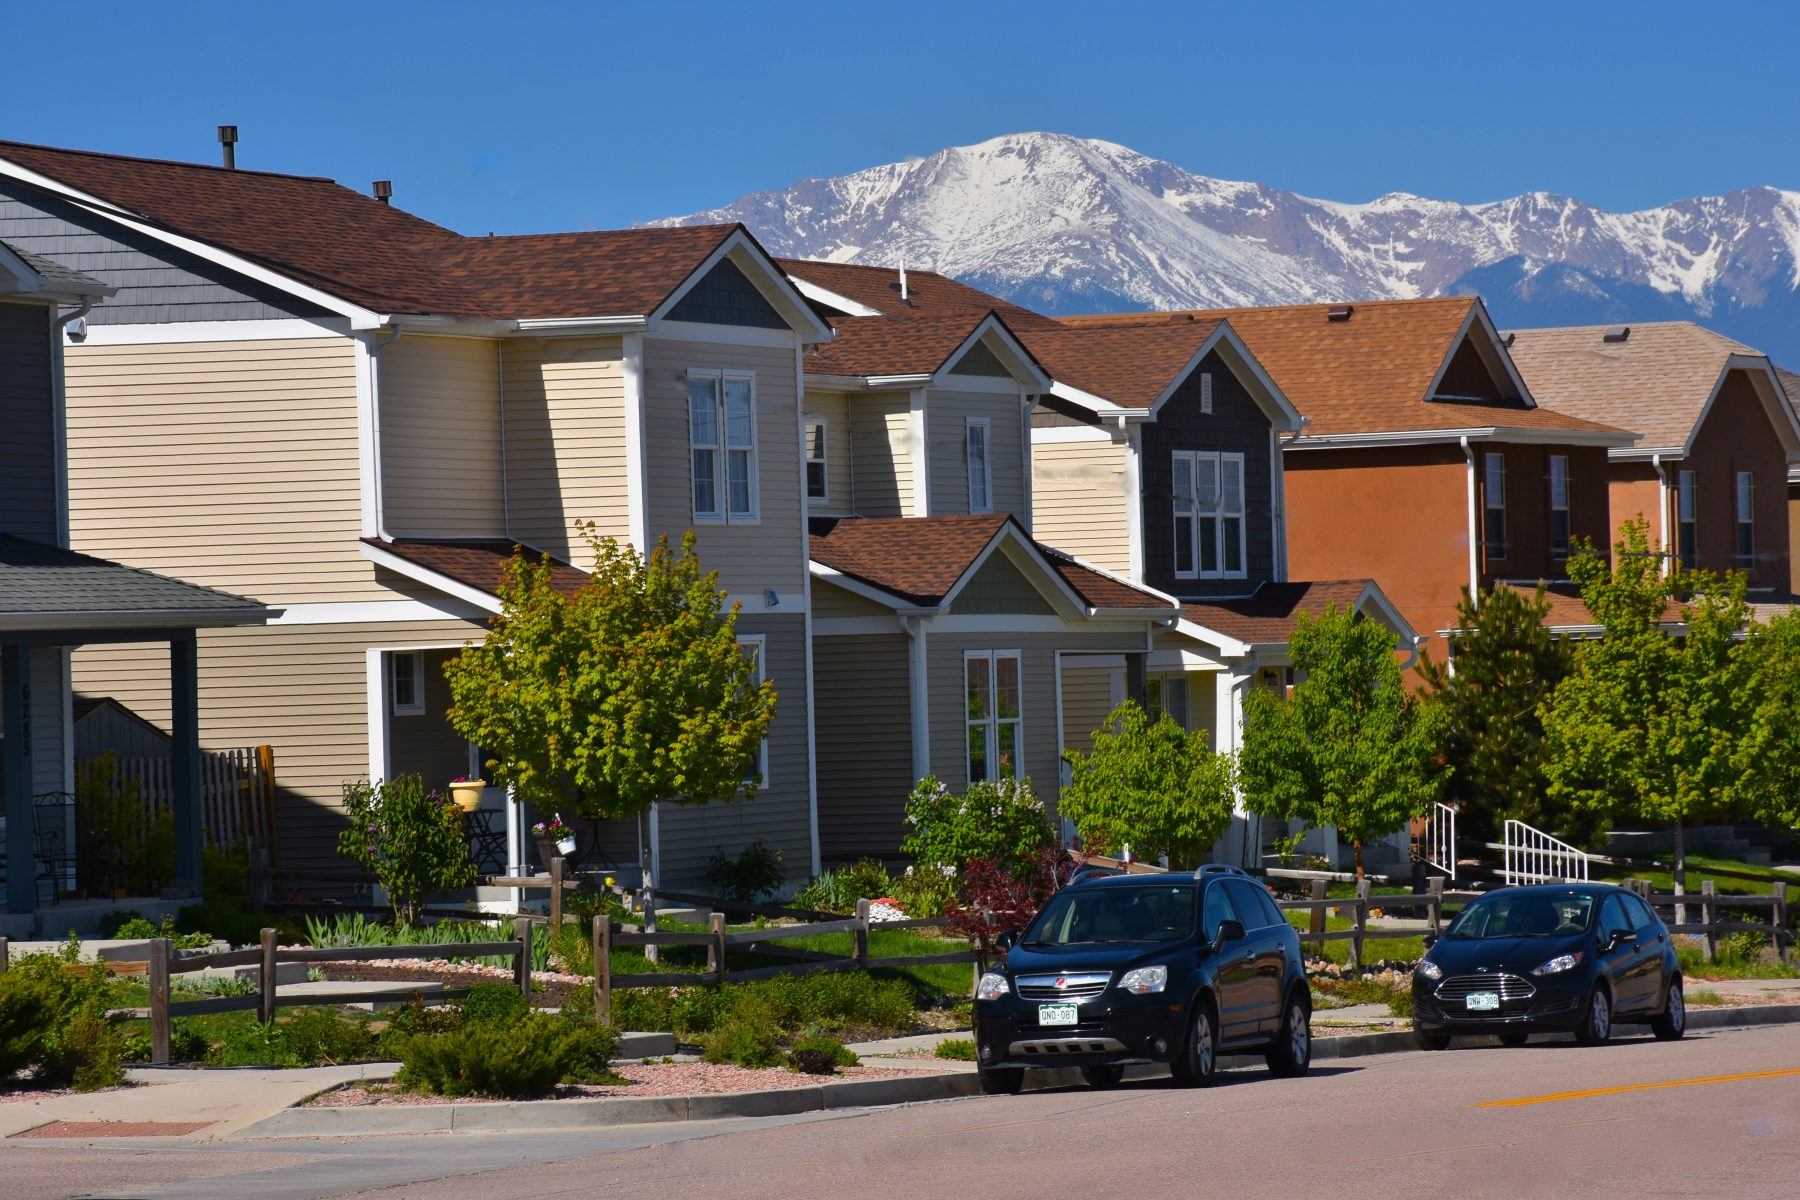 Row of houses with Pikes Peak in background